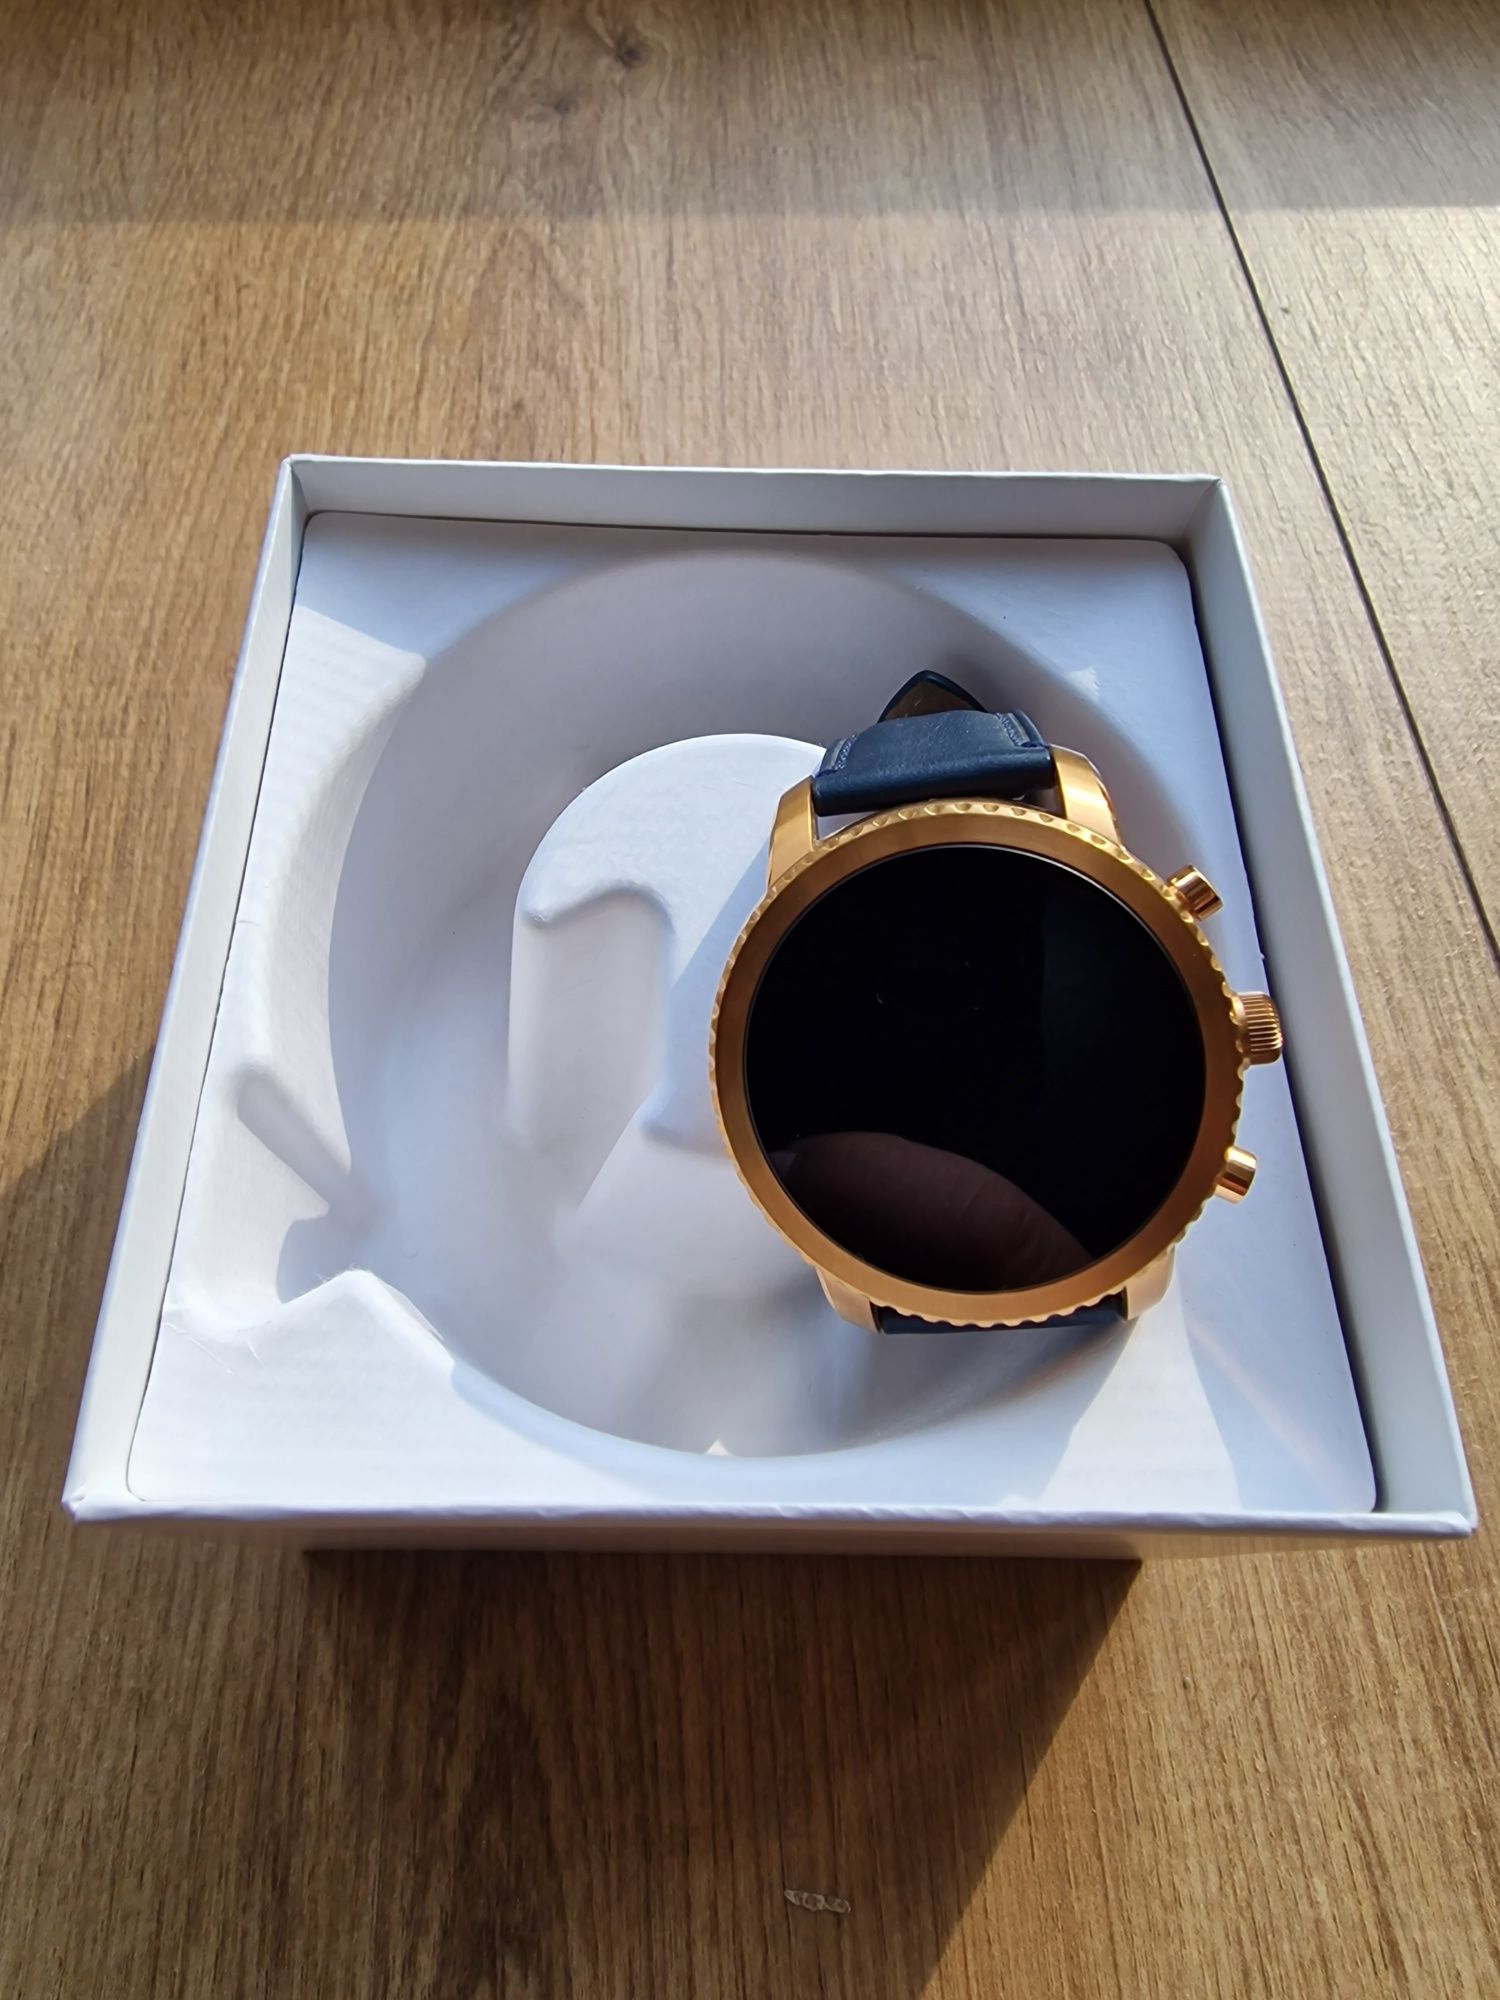 Fossil FTW4002  smartwatch